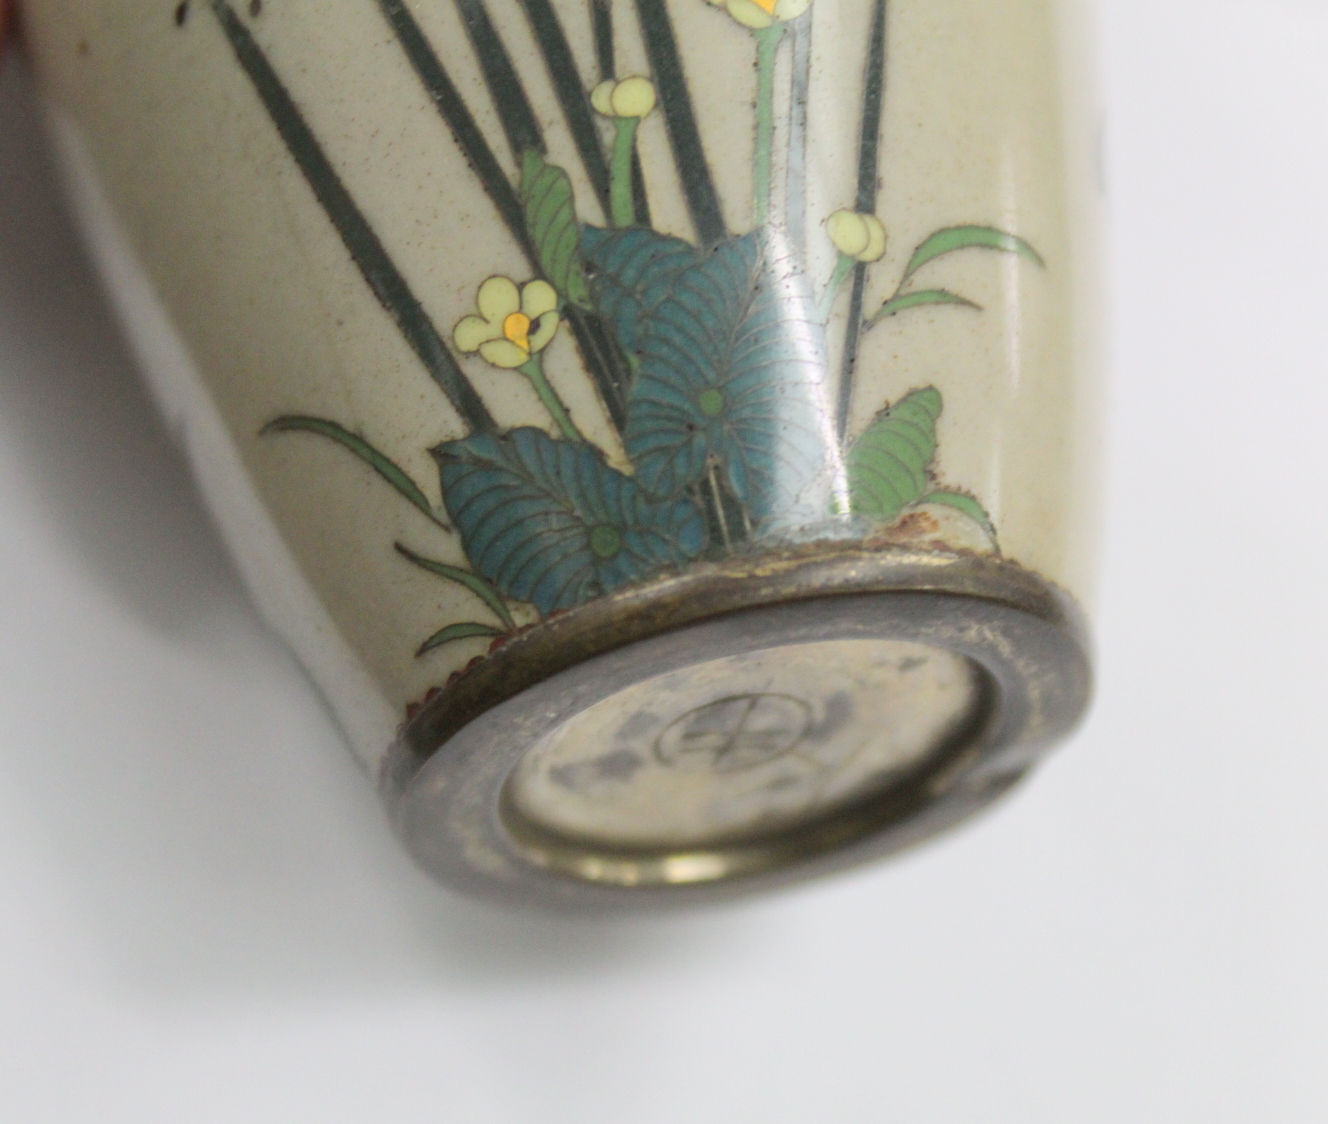 Pair of small Japanese Meiji period cloisonné vases with polychrome enamel decoration highlighted - Image 15 of 20